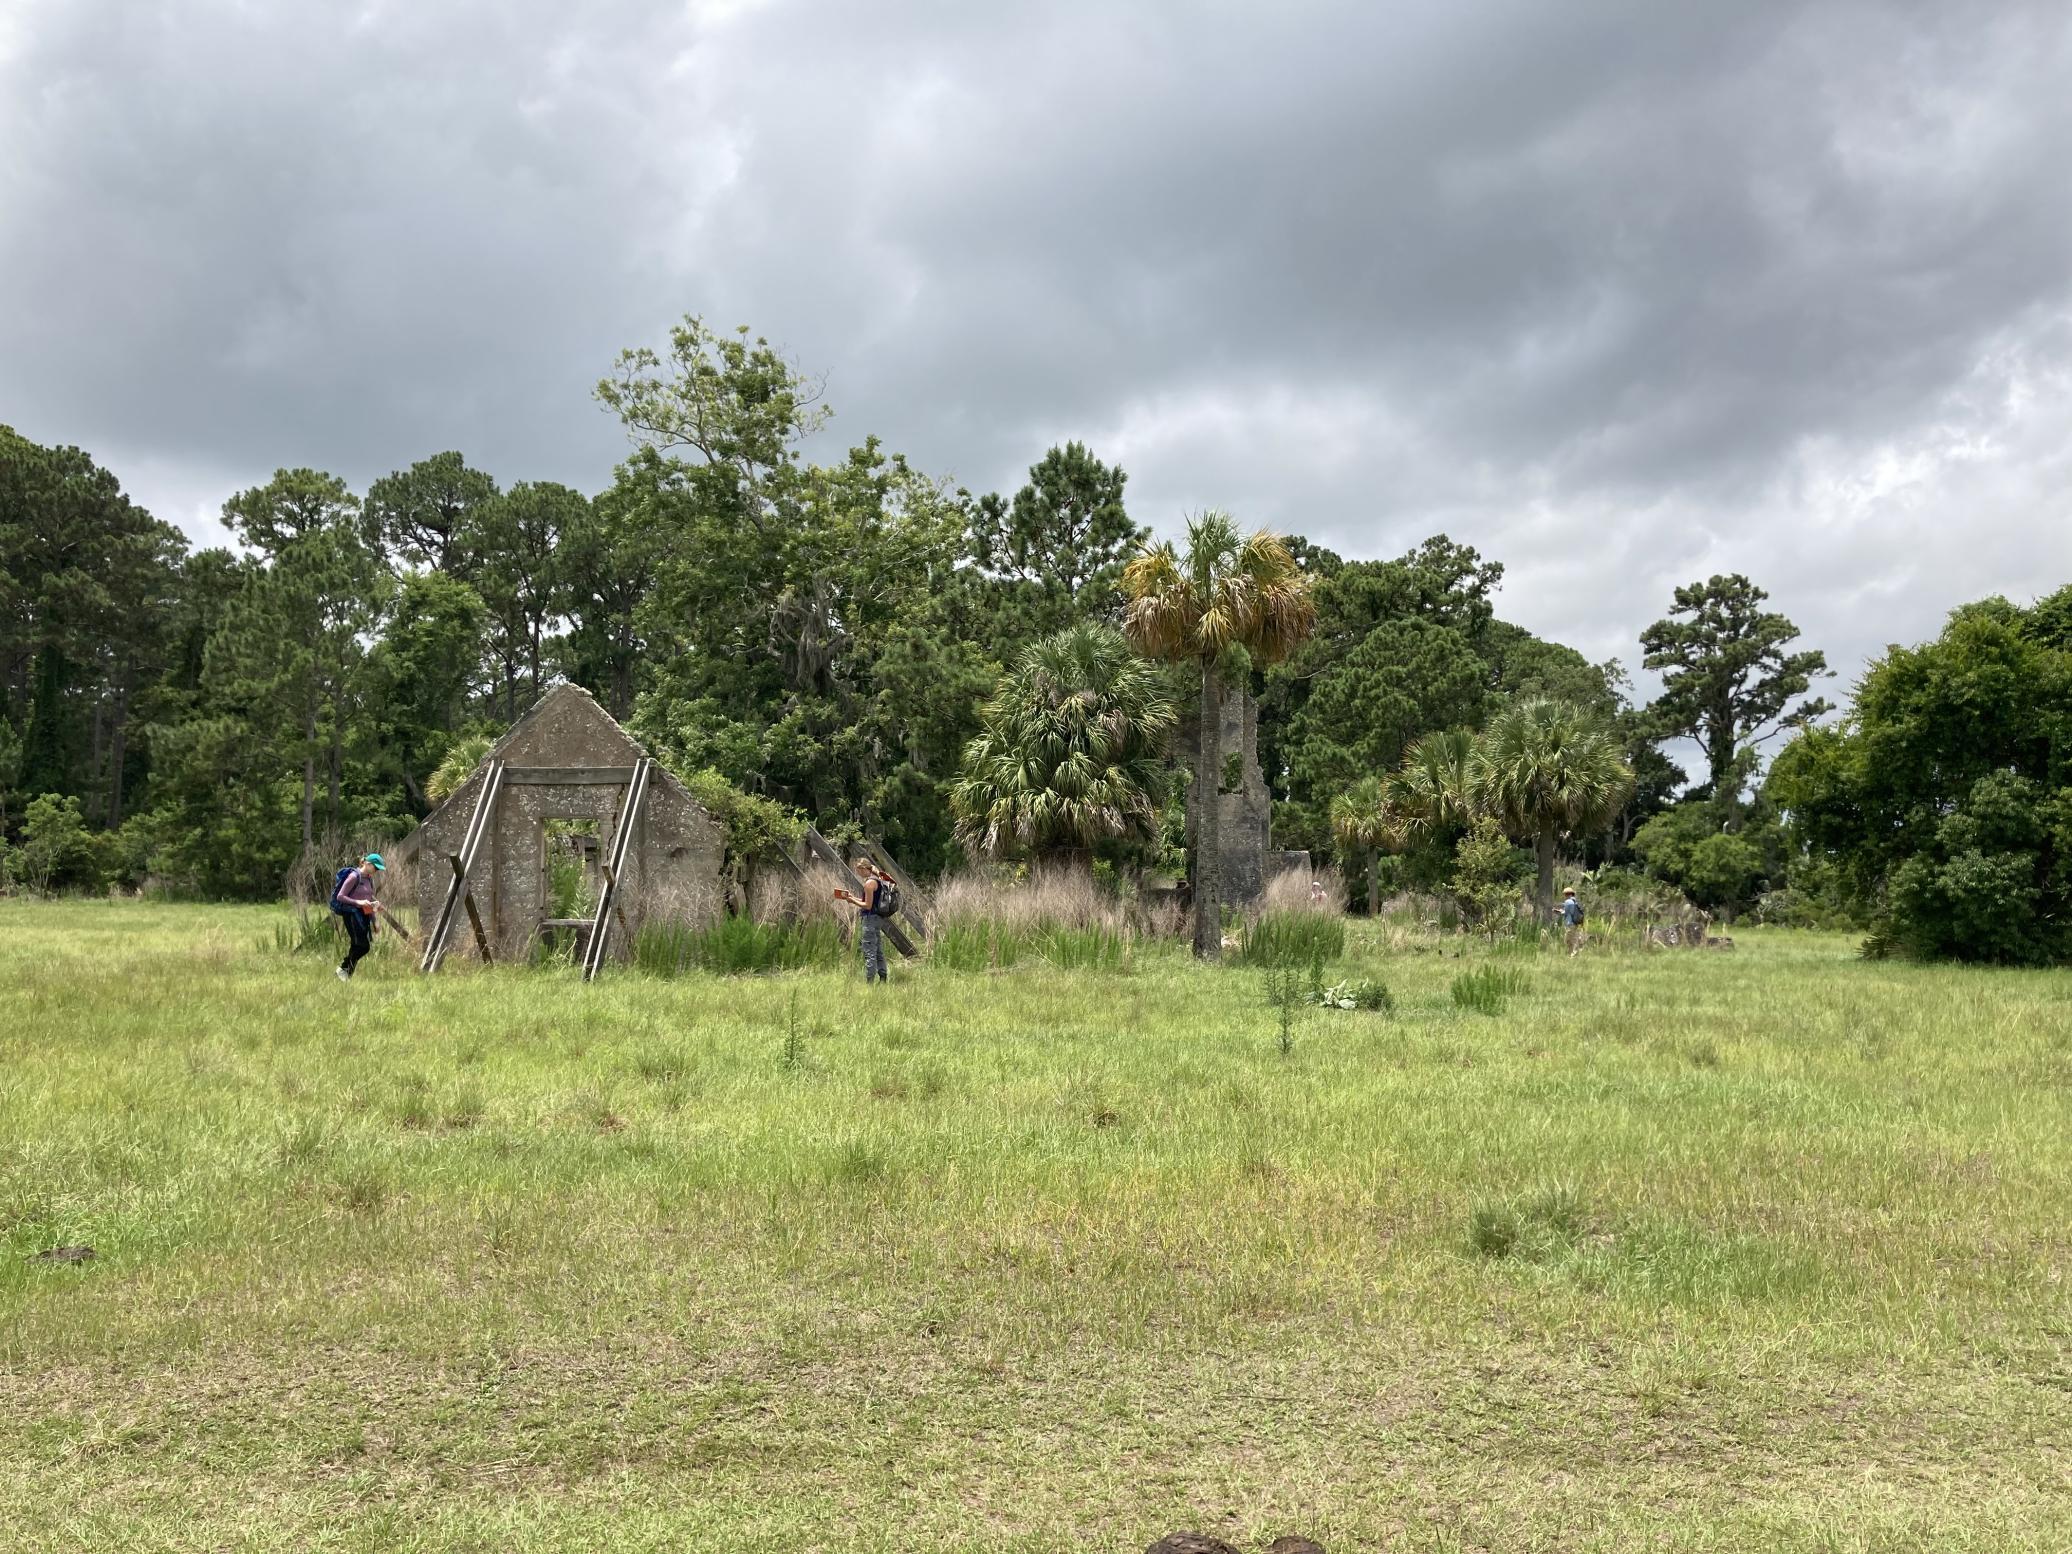 "Students on the 2022 Interdisciplinary Field Program record observations on a 19th-century structure at the site of Chocolate Plantation on Sapelo Island, Georgia." -Megan Conger